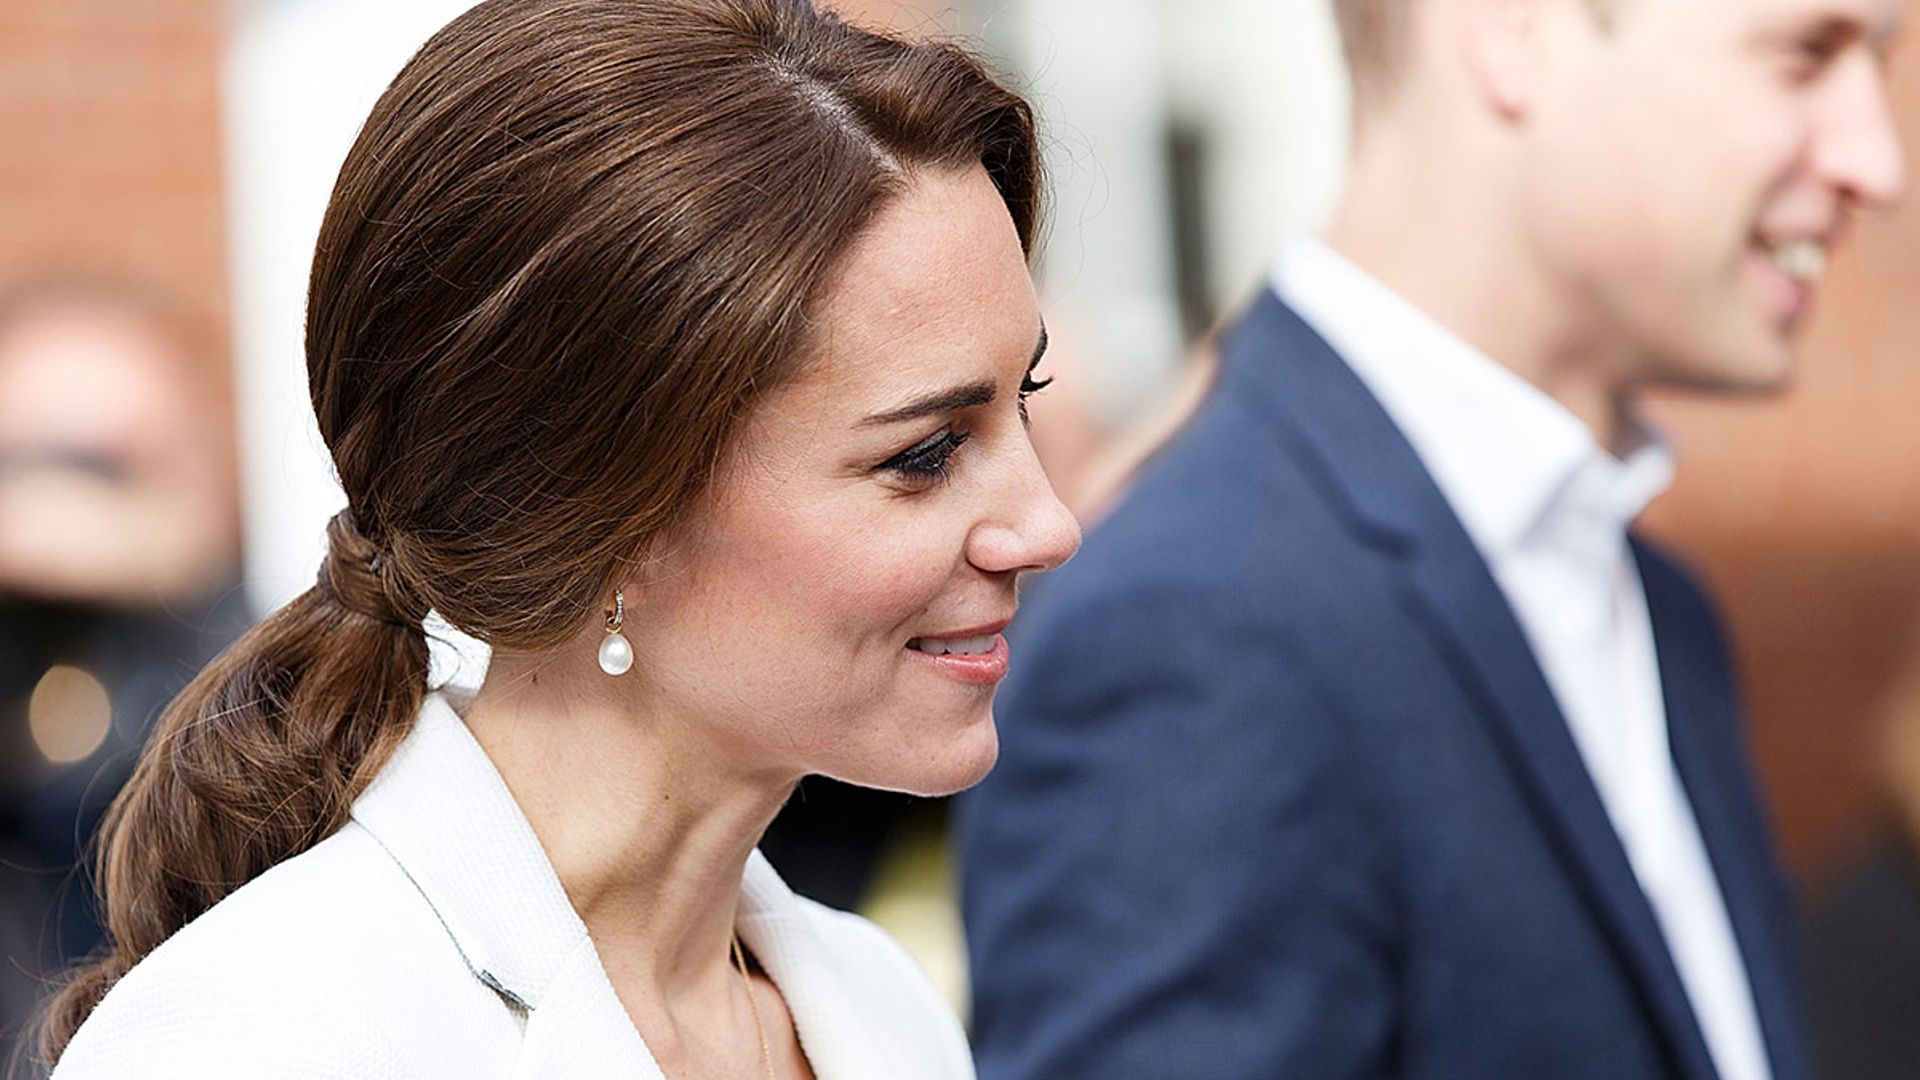 Kate Middleton just sported balayage hair - did you notice? | HELLO!